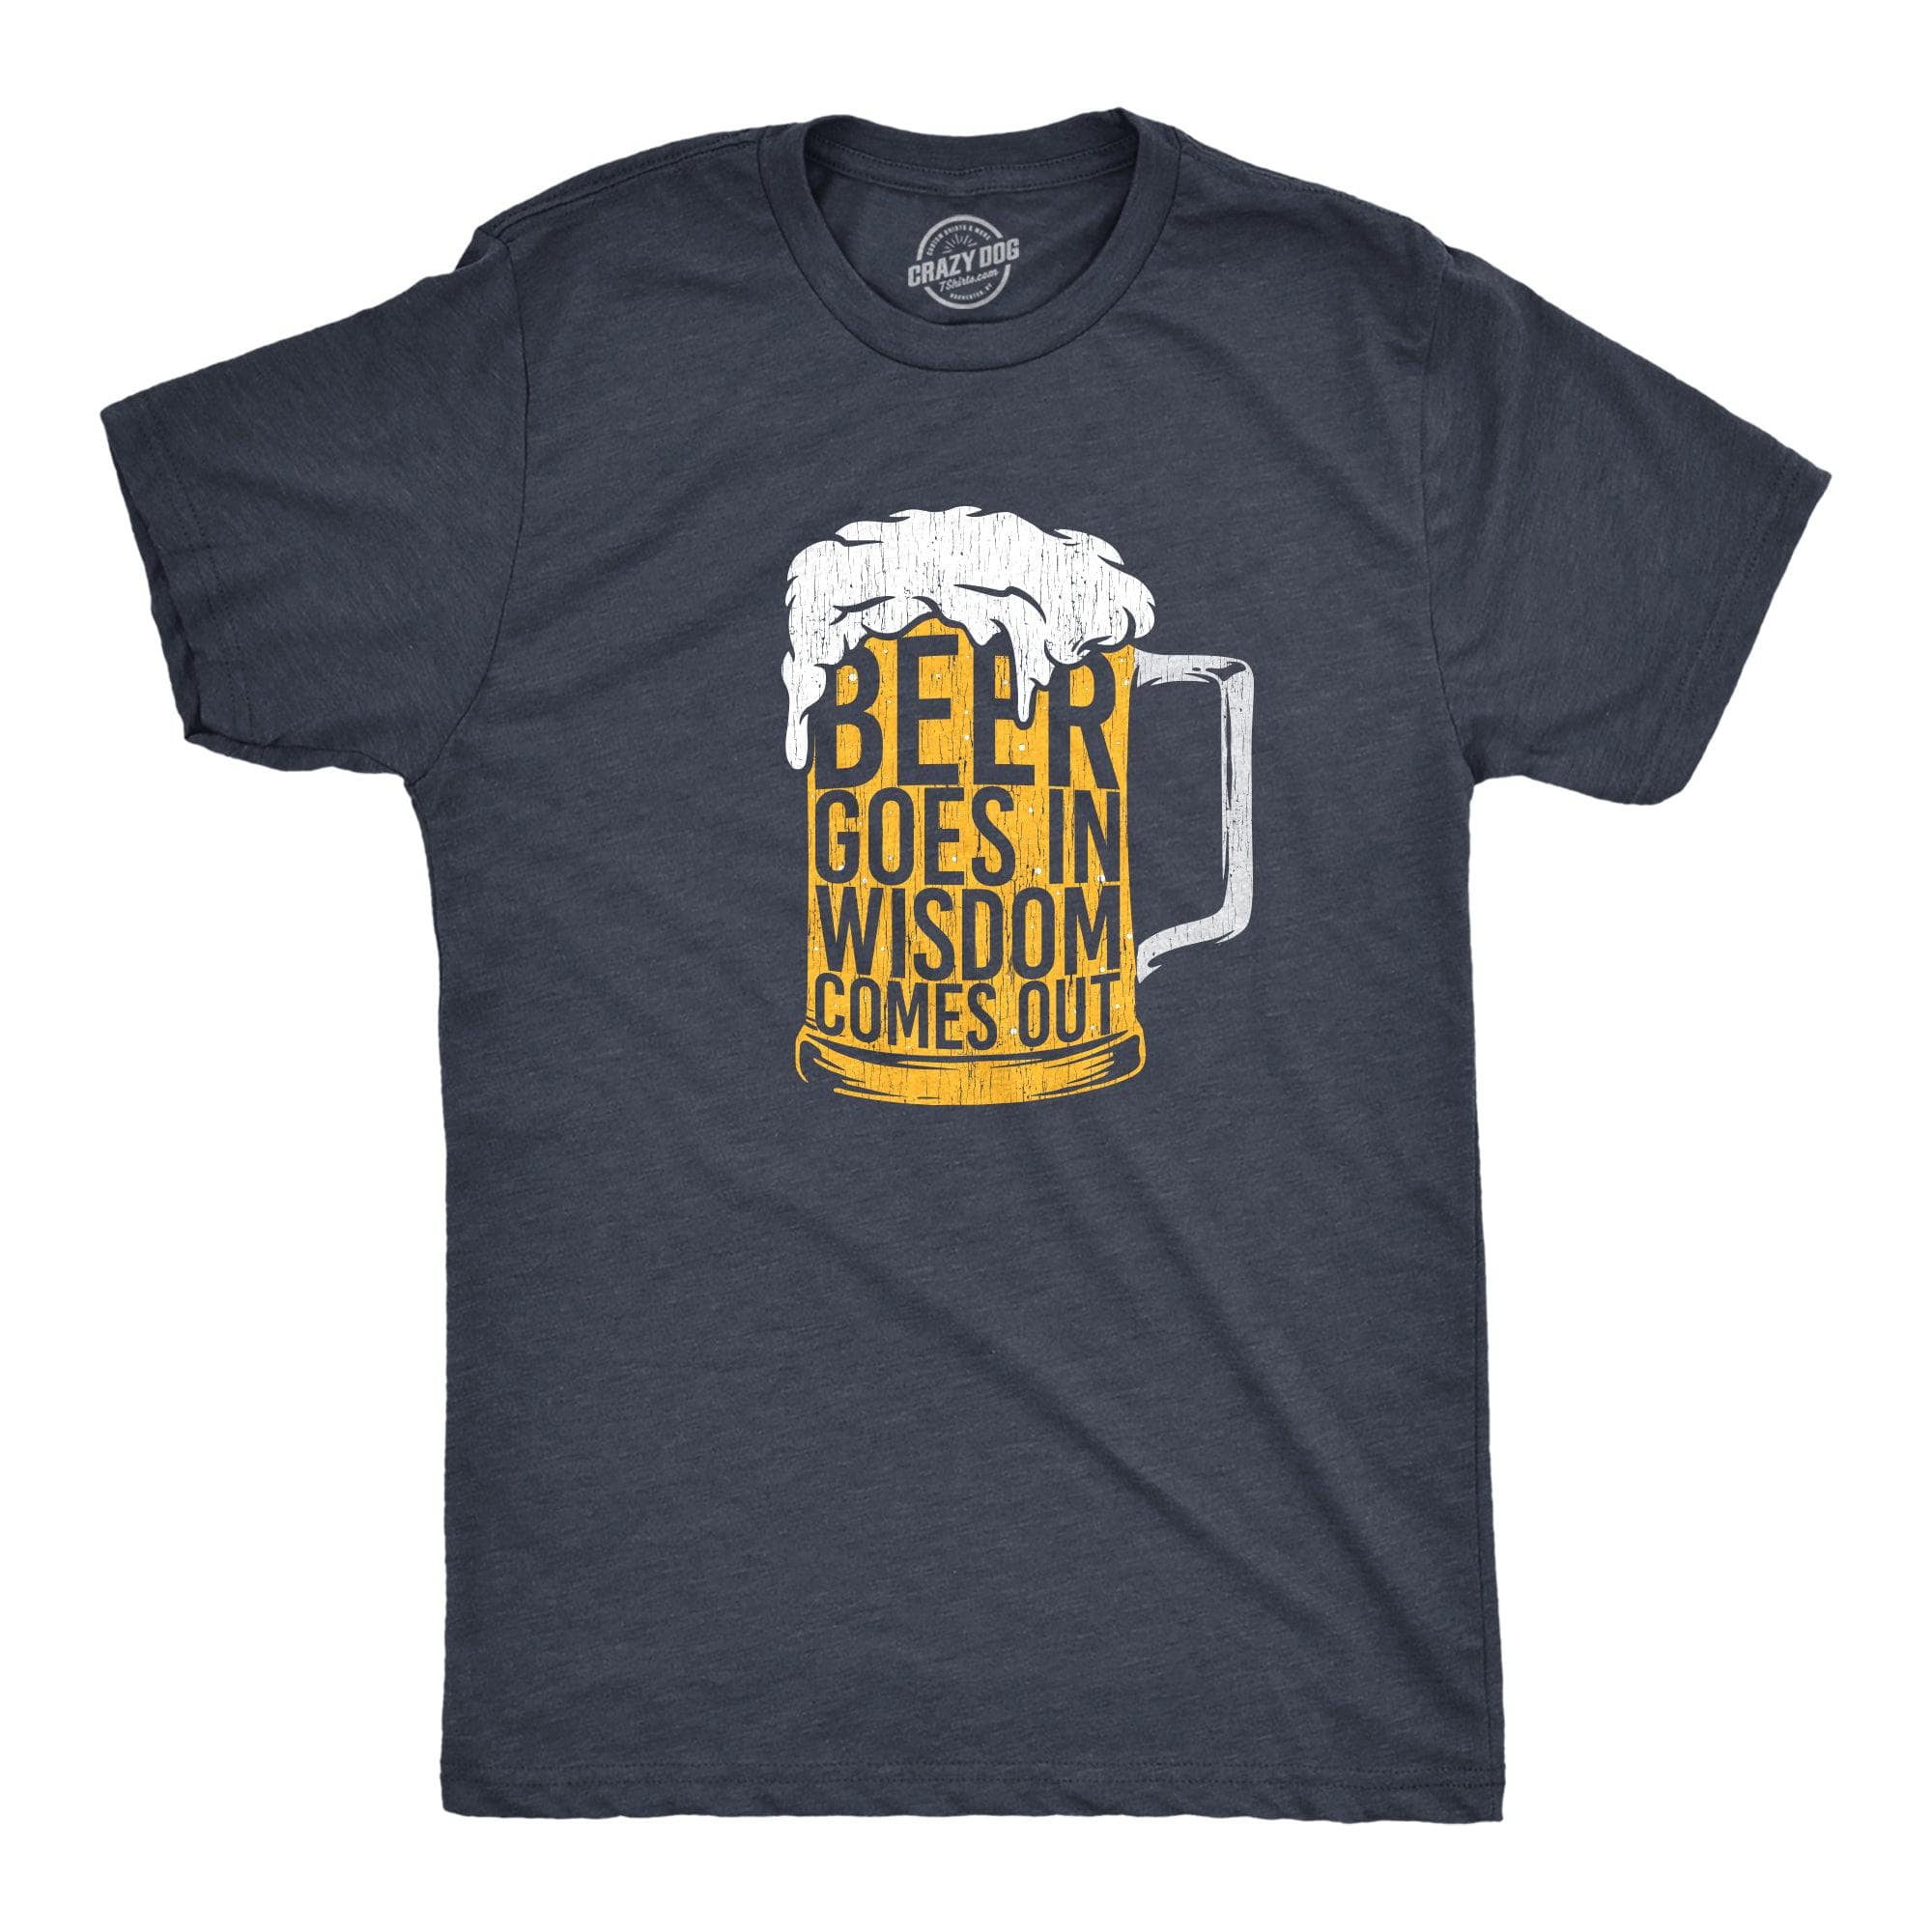 Beer Goes In Wisdom Comes Out Men's Tshirt  -  Crazy Dog T-Shirts